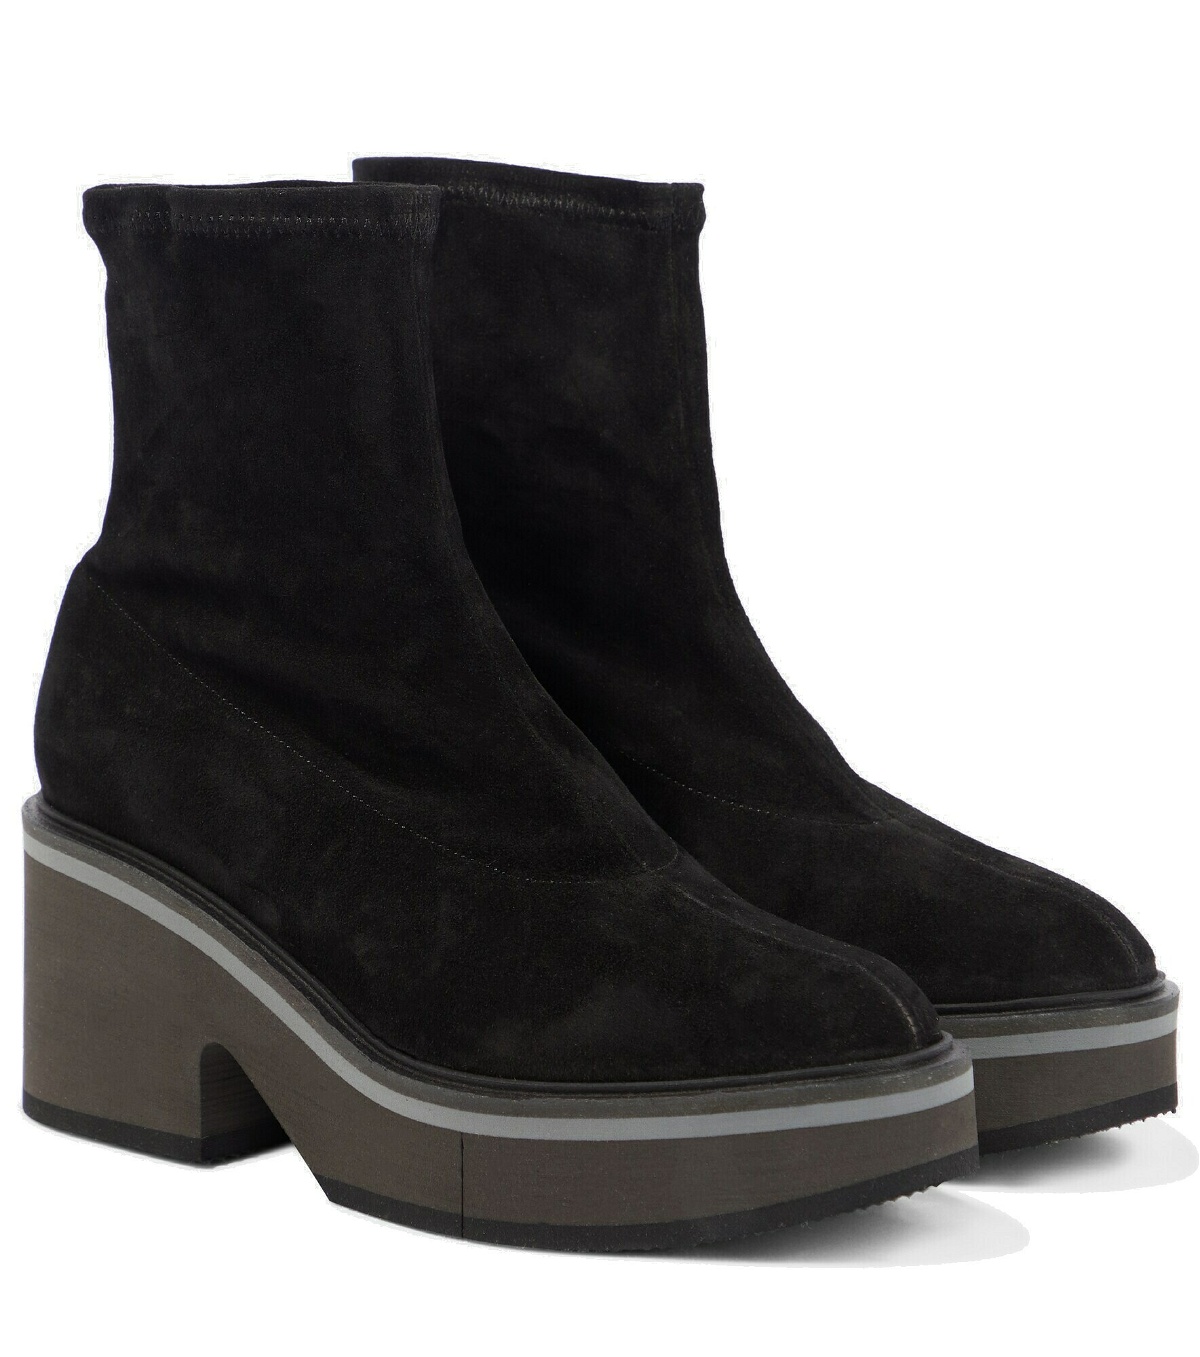 Clergerie - Albane suede ankle boots Clergerie